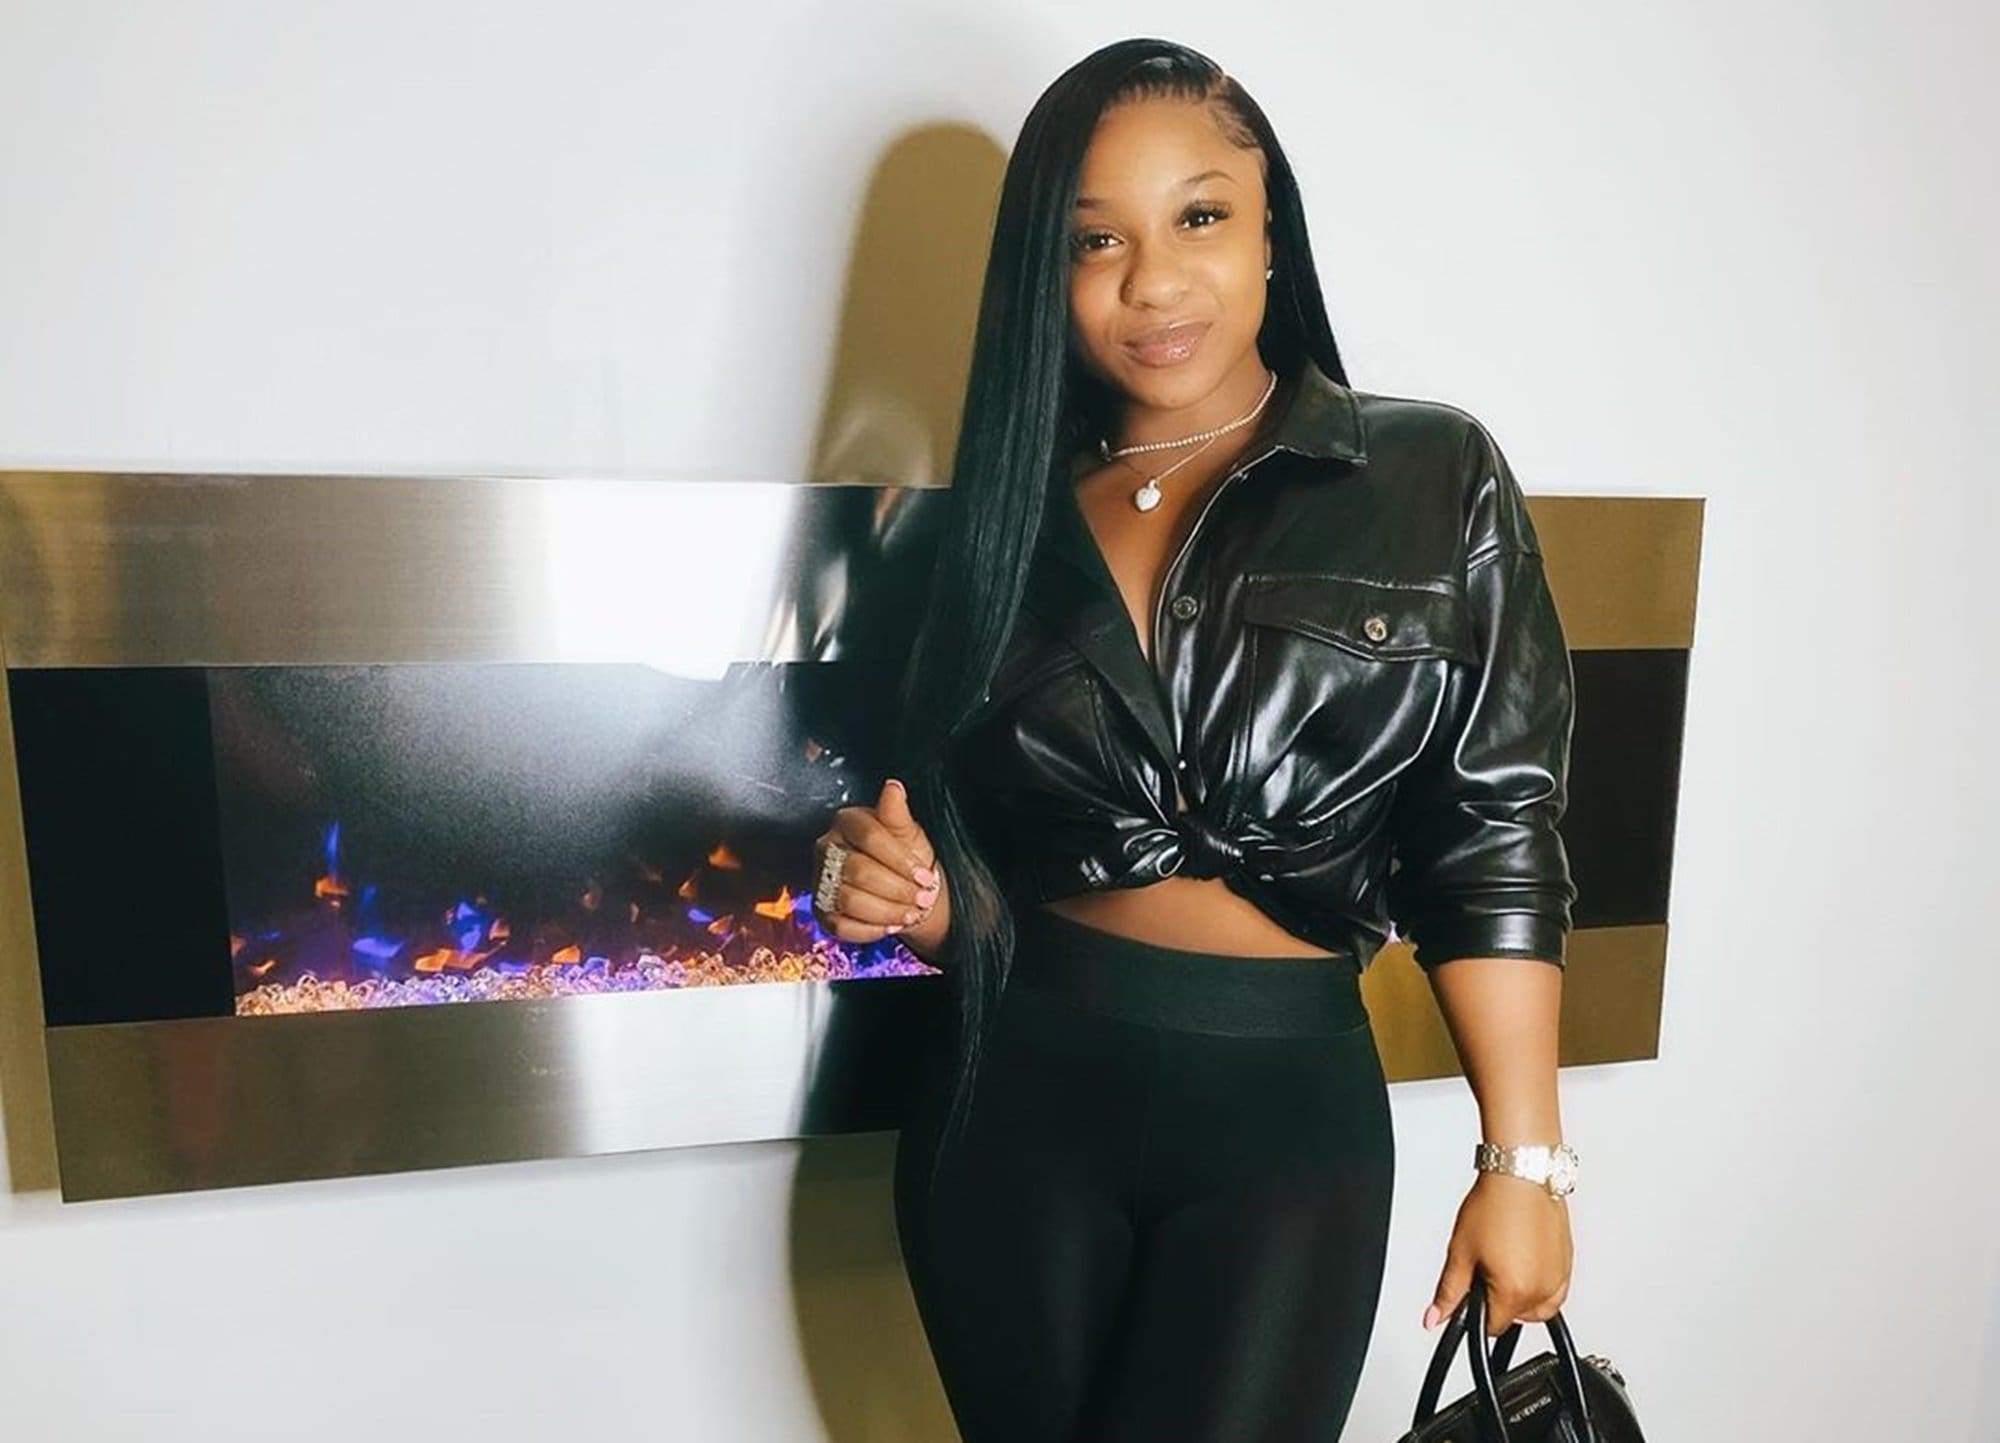 Reginae Carter Tells Her Fans She's In Quarantine And Posts A Video In Which She's Twerking